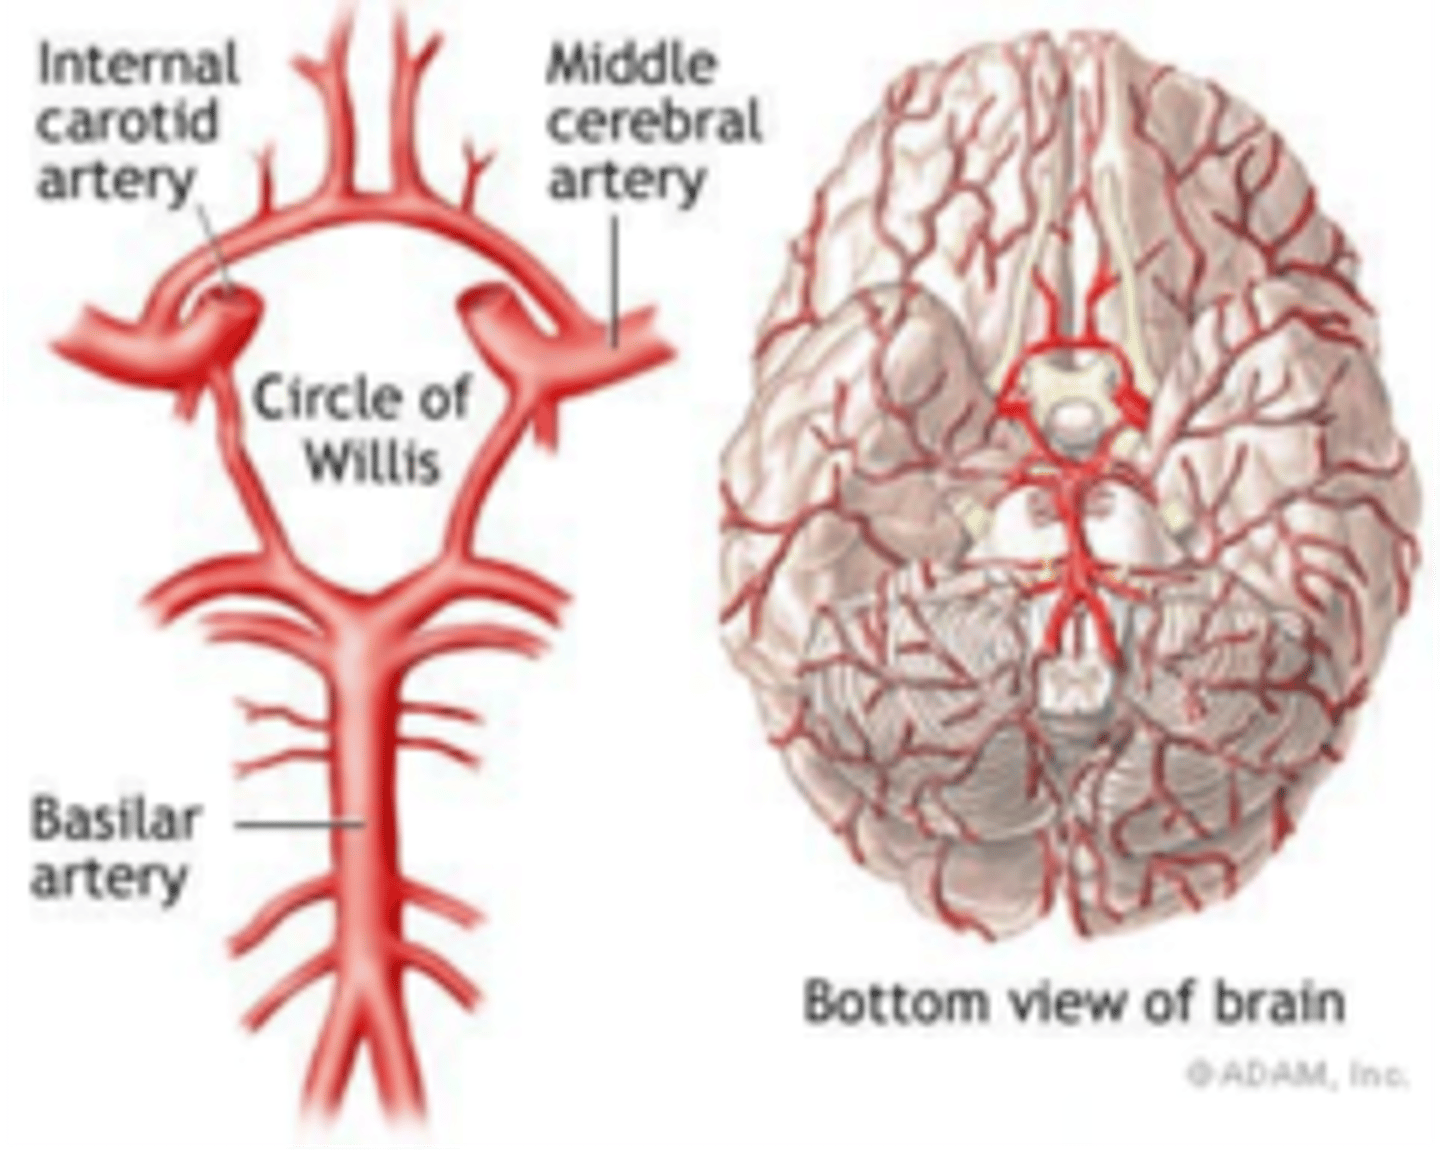 <p>The anterior parts of the cortex and deep structures are supplied by two branches of the internal carotid artery - the anterior and middle cerebral arteries.</p><p>The posterior part of the cortex and deep structures are supplied a branch of the vertebral artery - the posterior (basilar) cerebral artery. The cerebellum and brainstem are supplied by various branches of the vertebral artery.</p><p>The anterior and posterior circulations are united by the circle of Willis.</p>